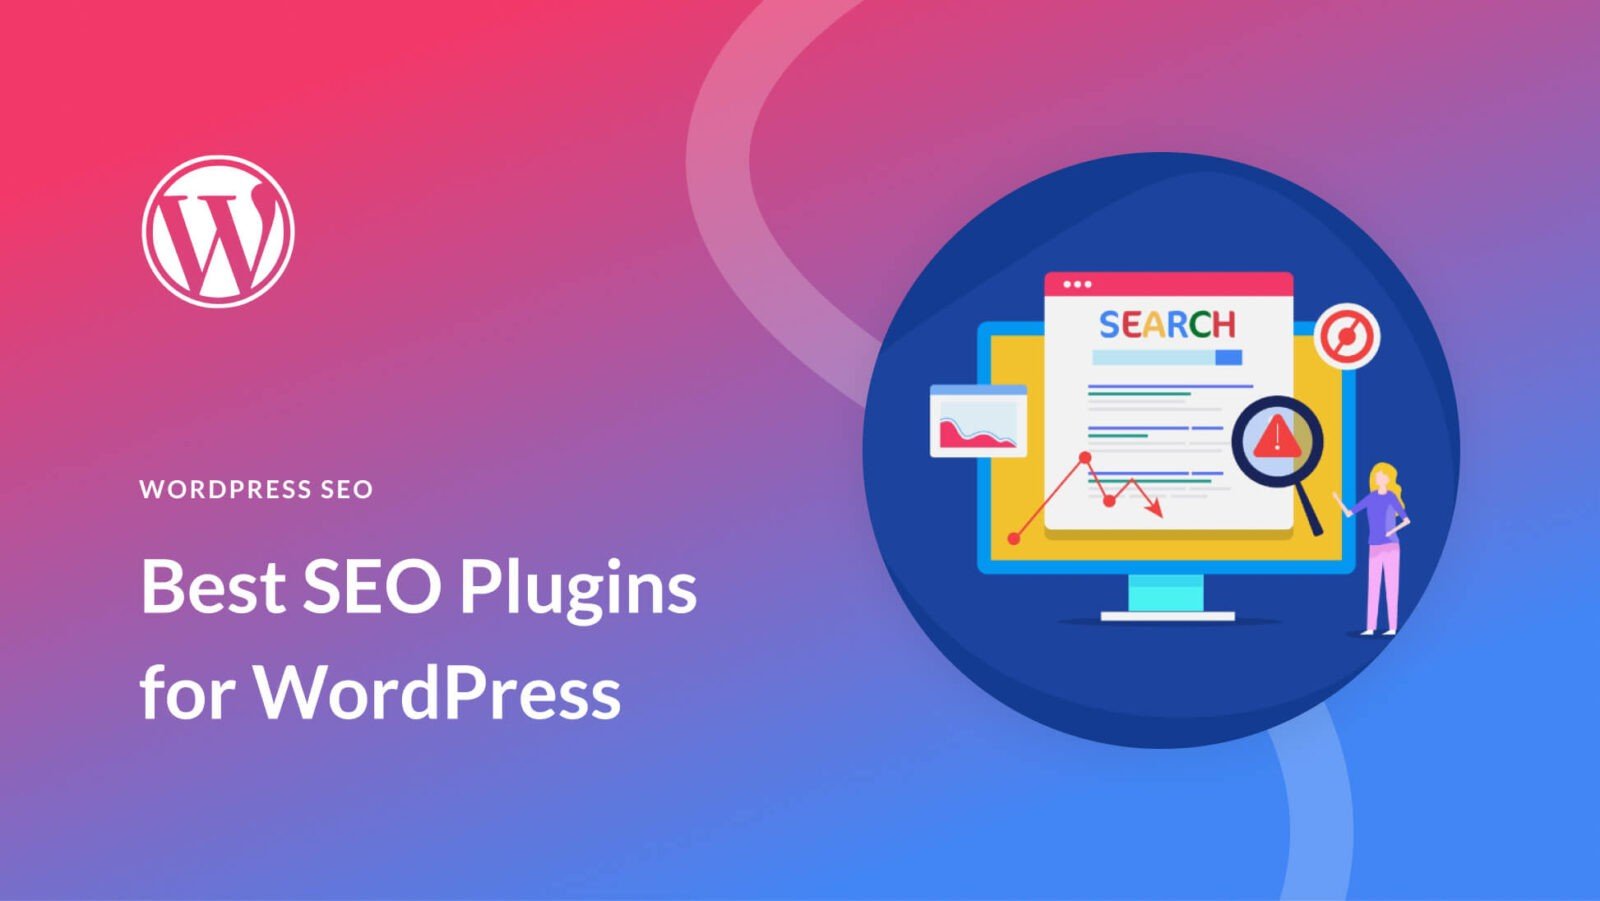 Yoast SEO Plugin: Enhance Your Website’s Search Engine Visibility